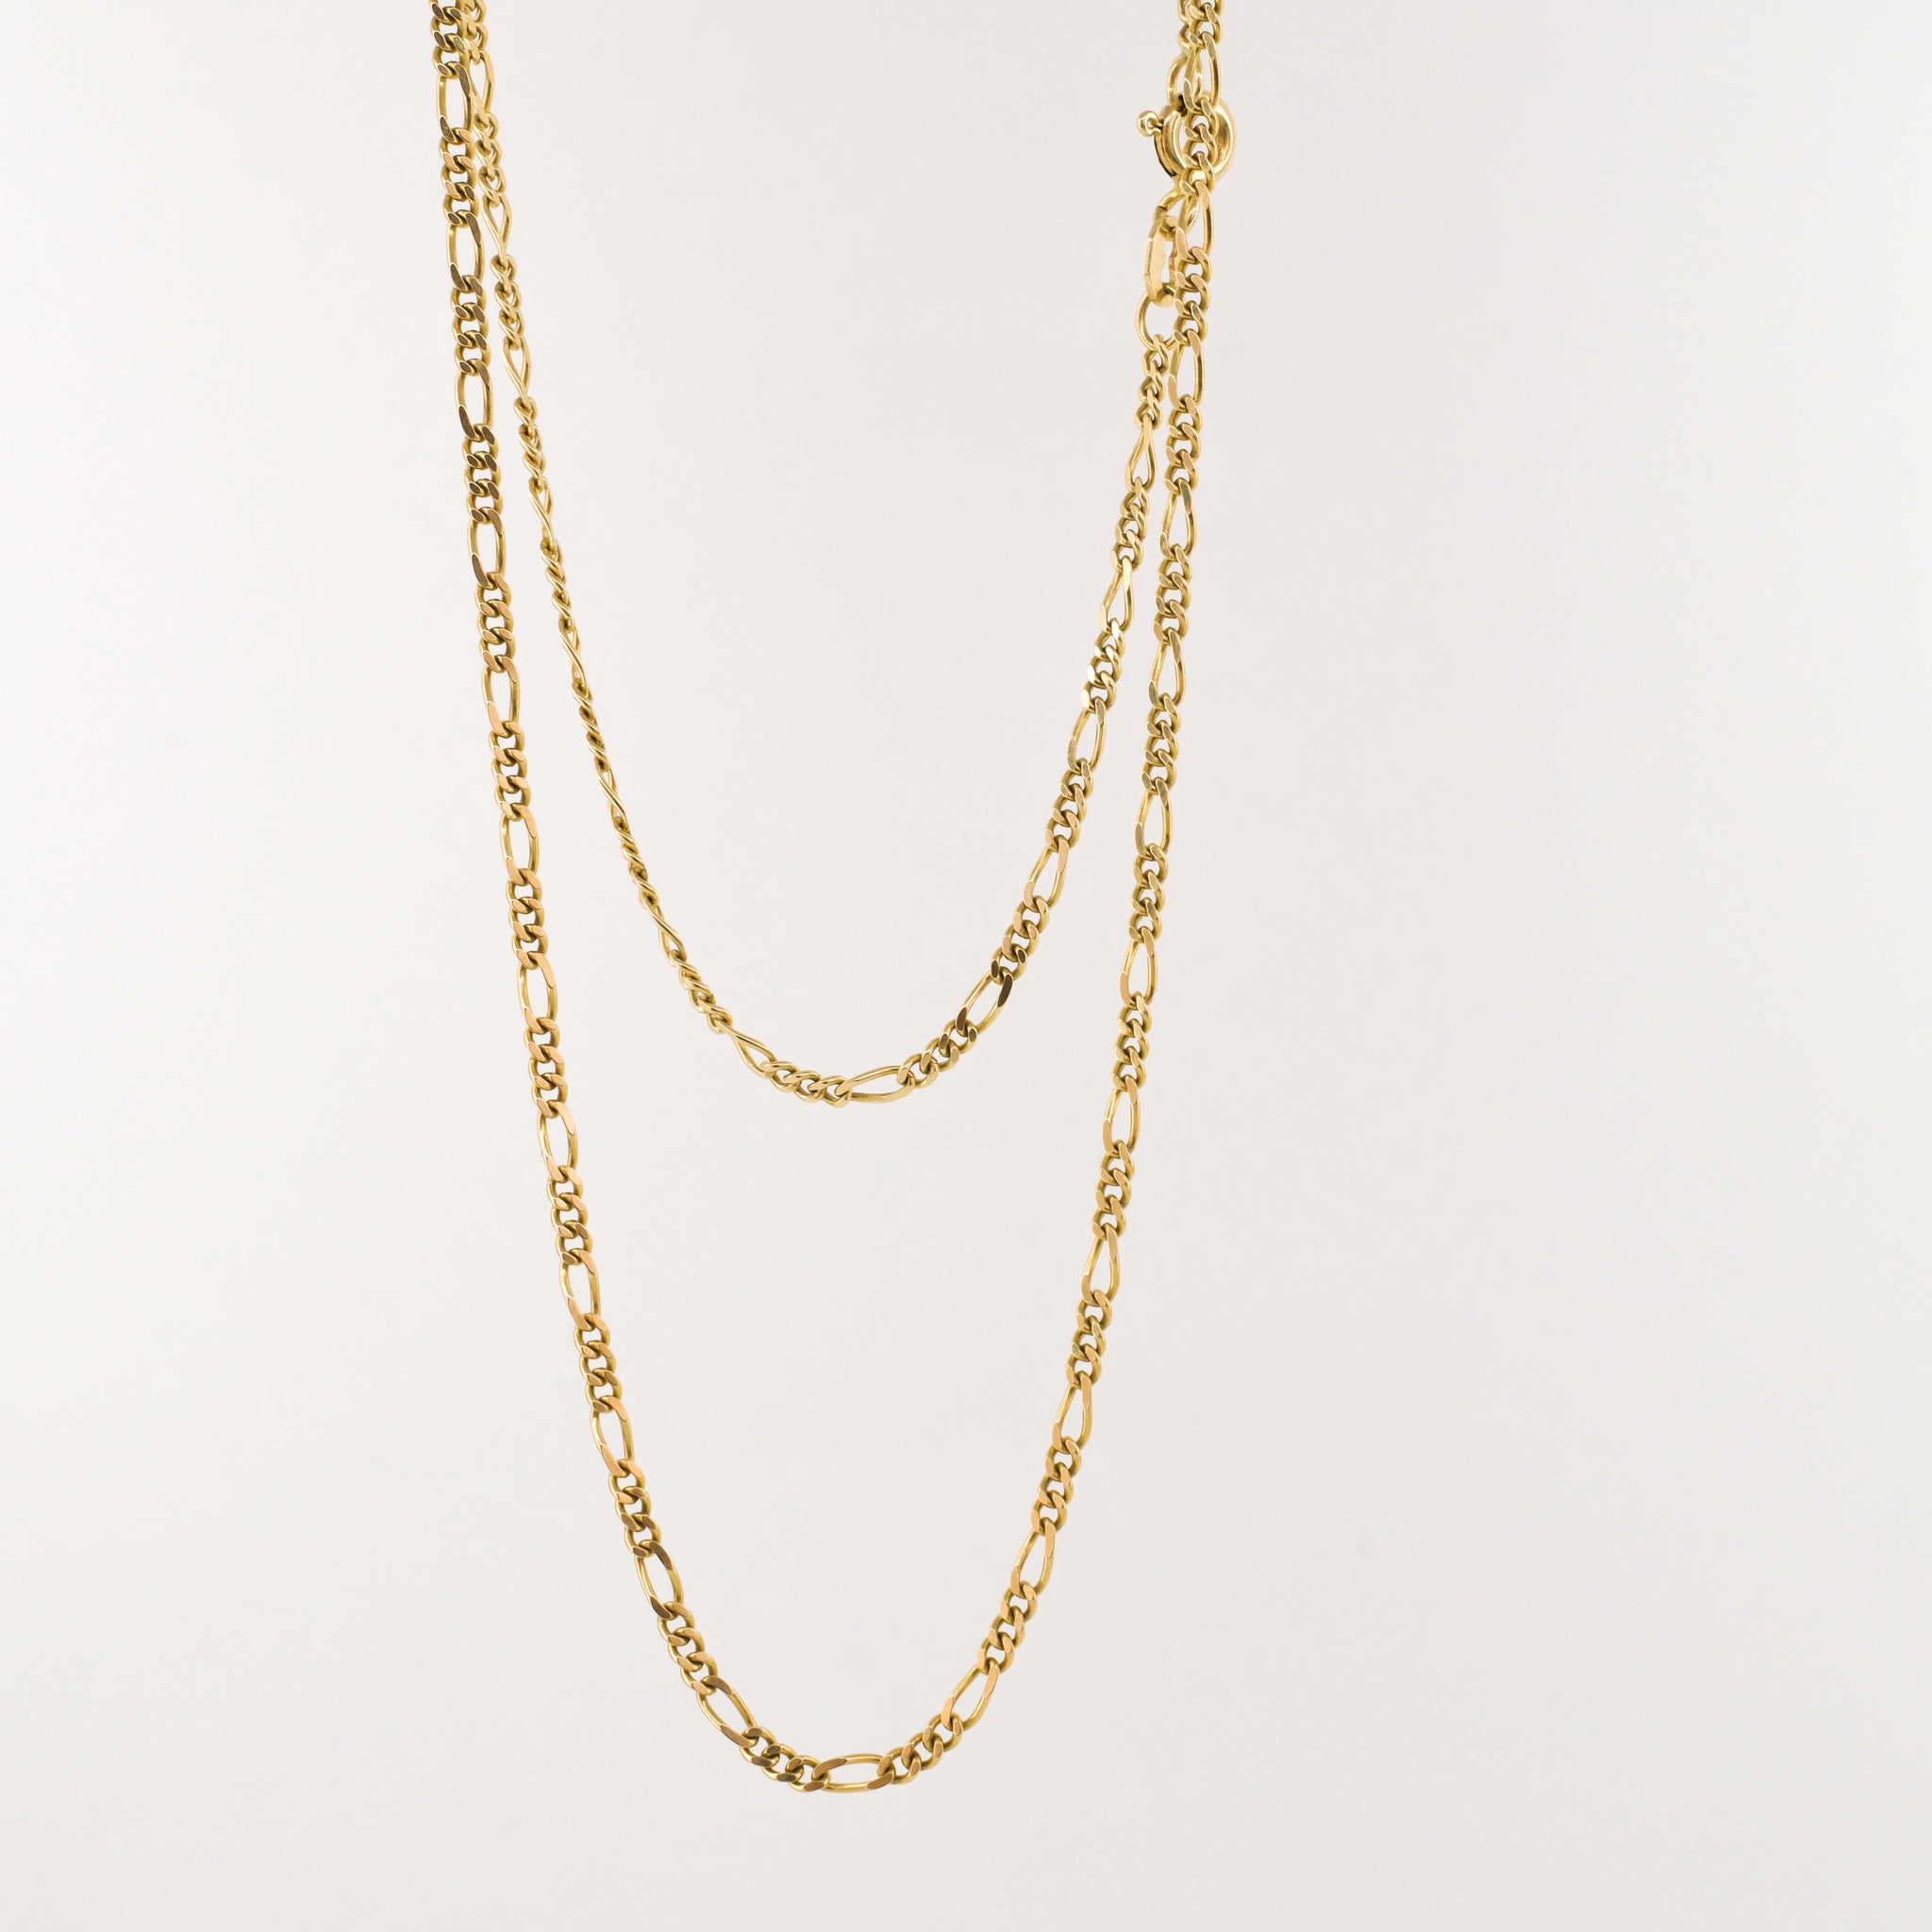 24.5" Figaro Chain Necklace (18k)